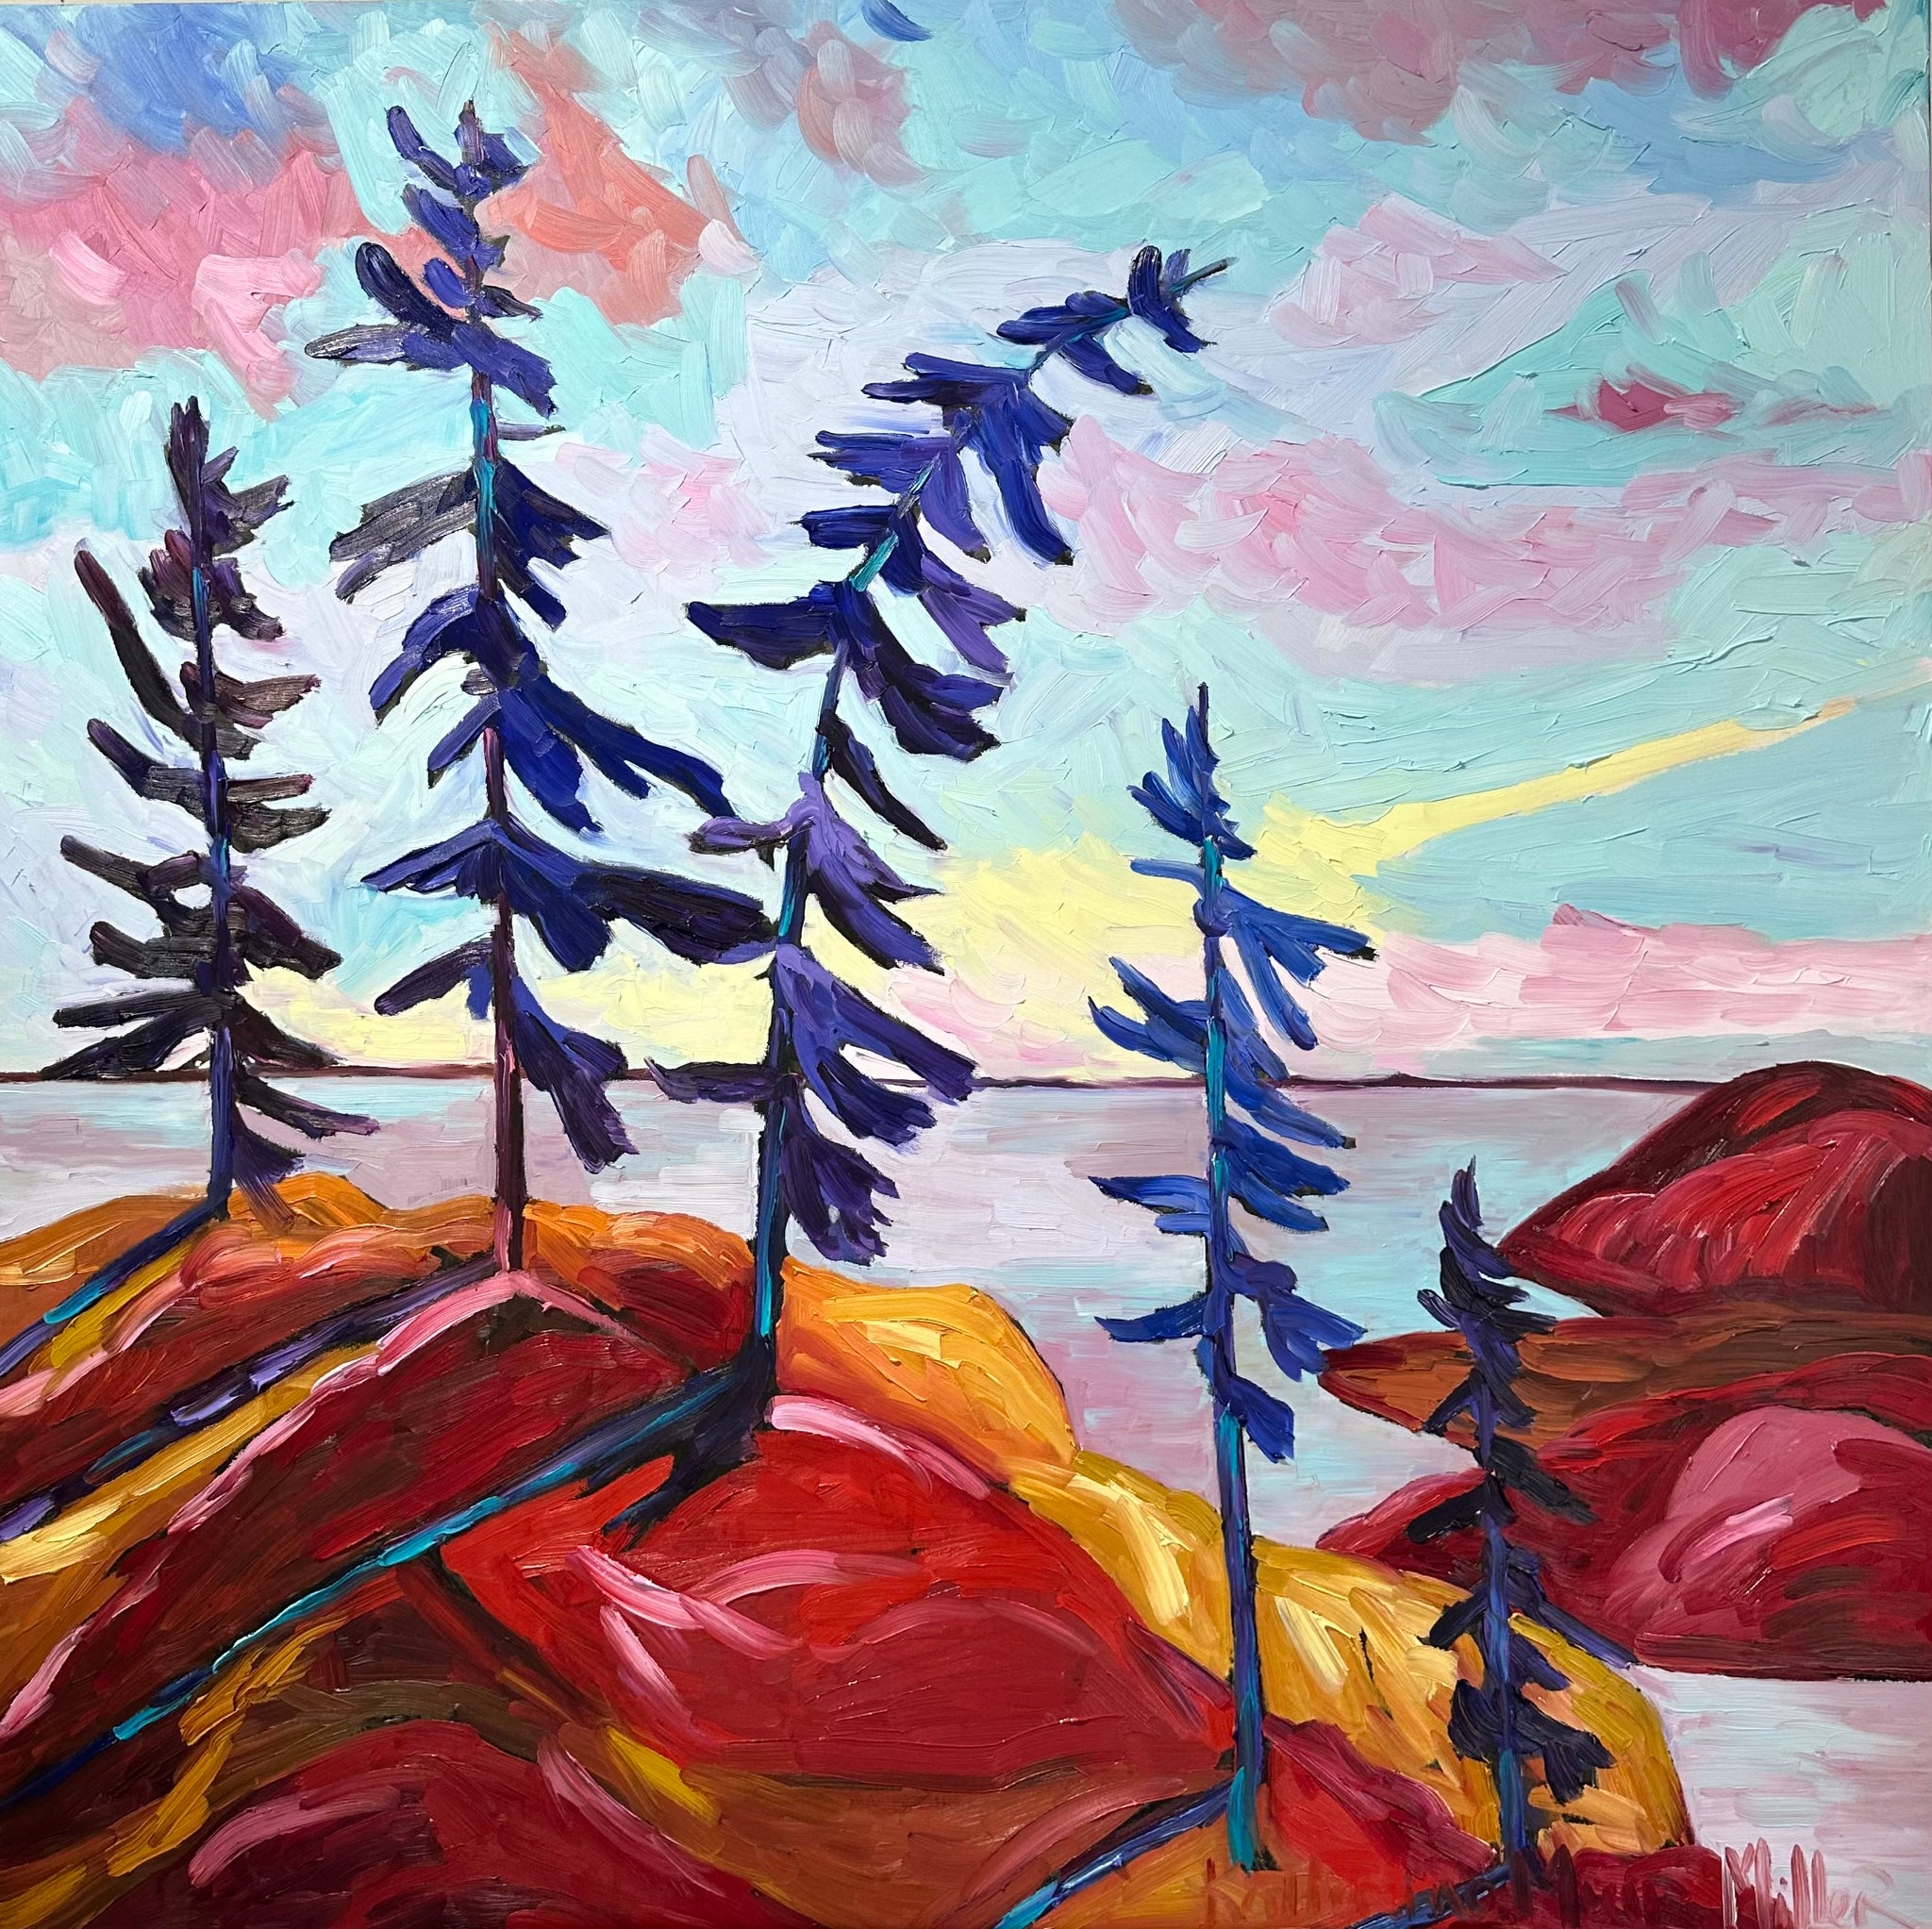 "Canadian Beauty" Inspired by Canadian Road Trips